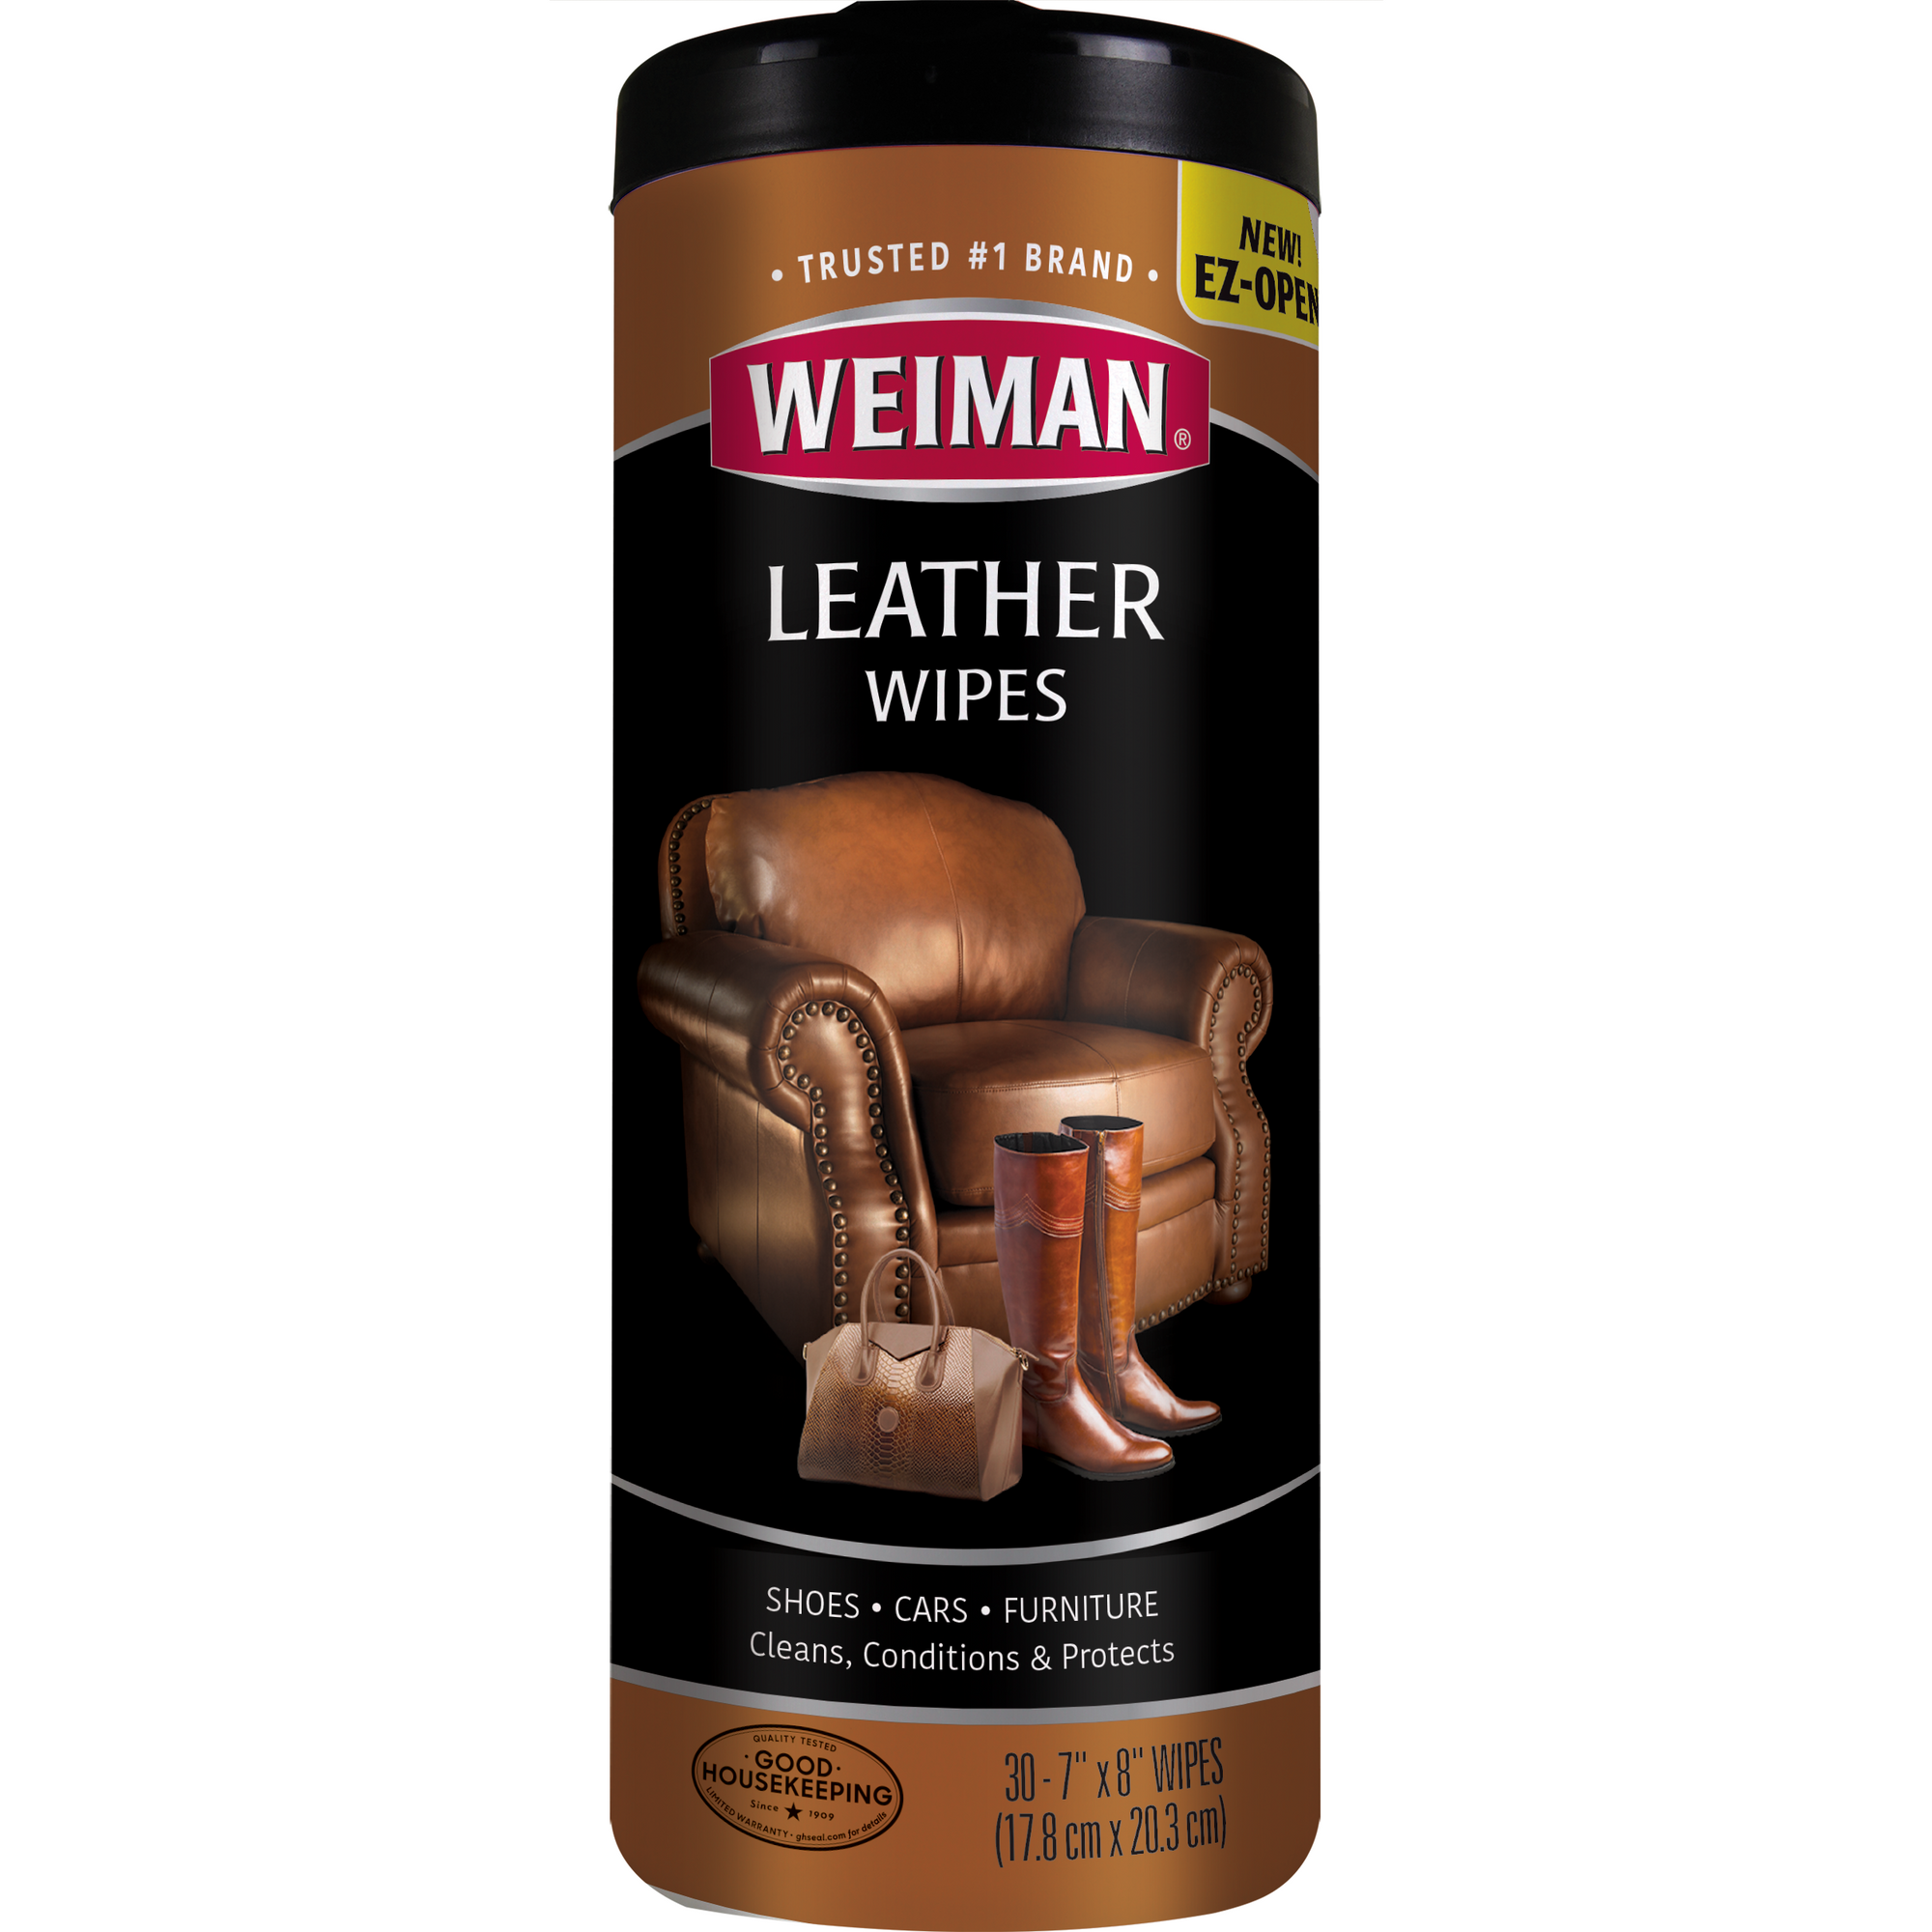 Weiman Leather Wipes, 30 Ct